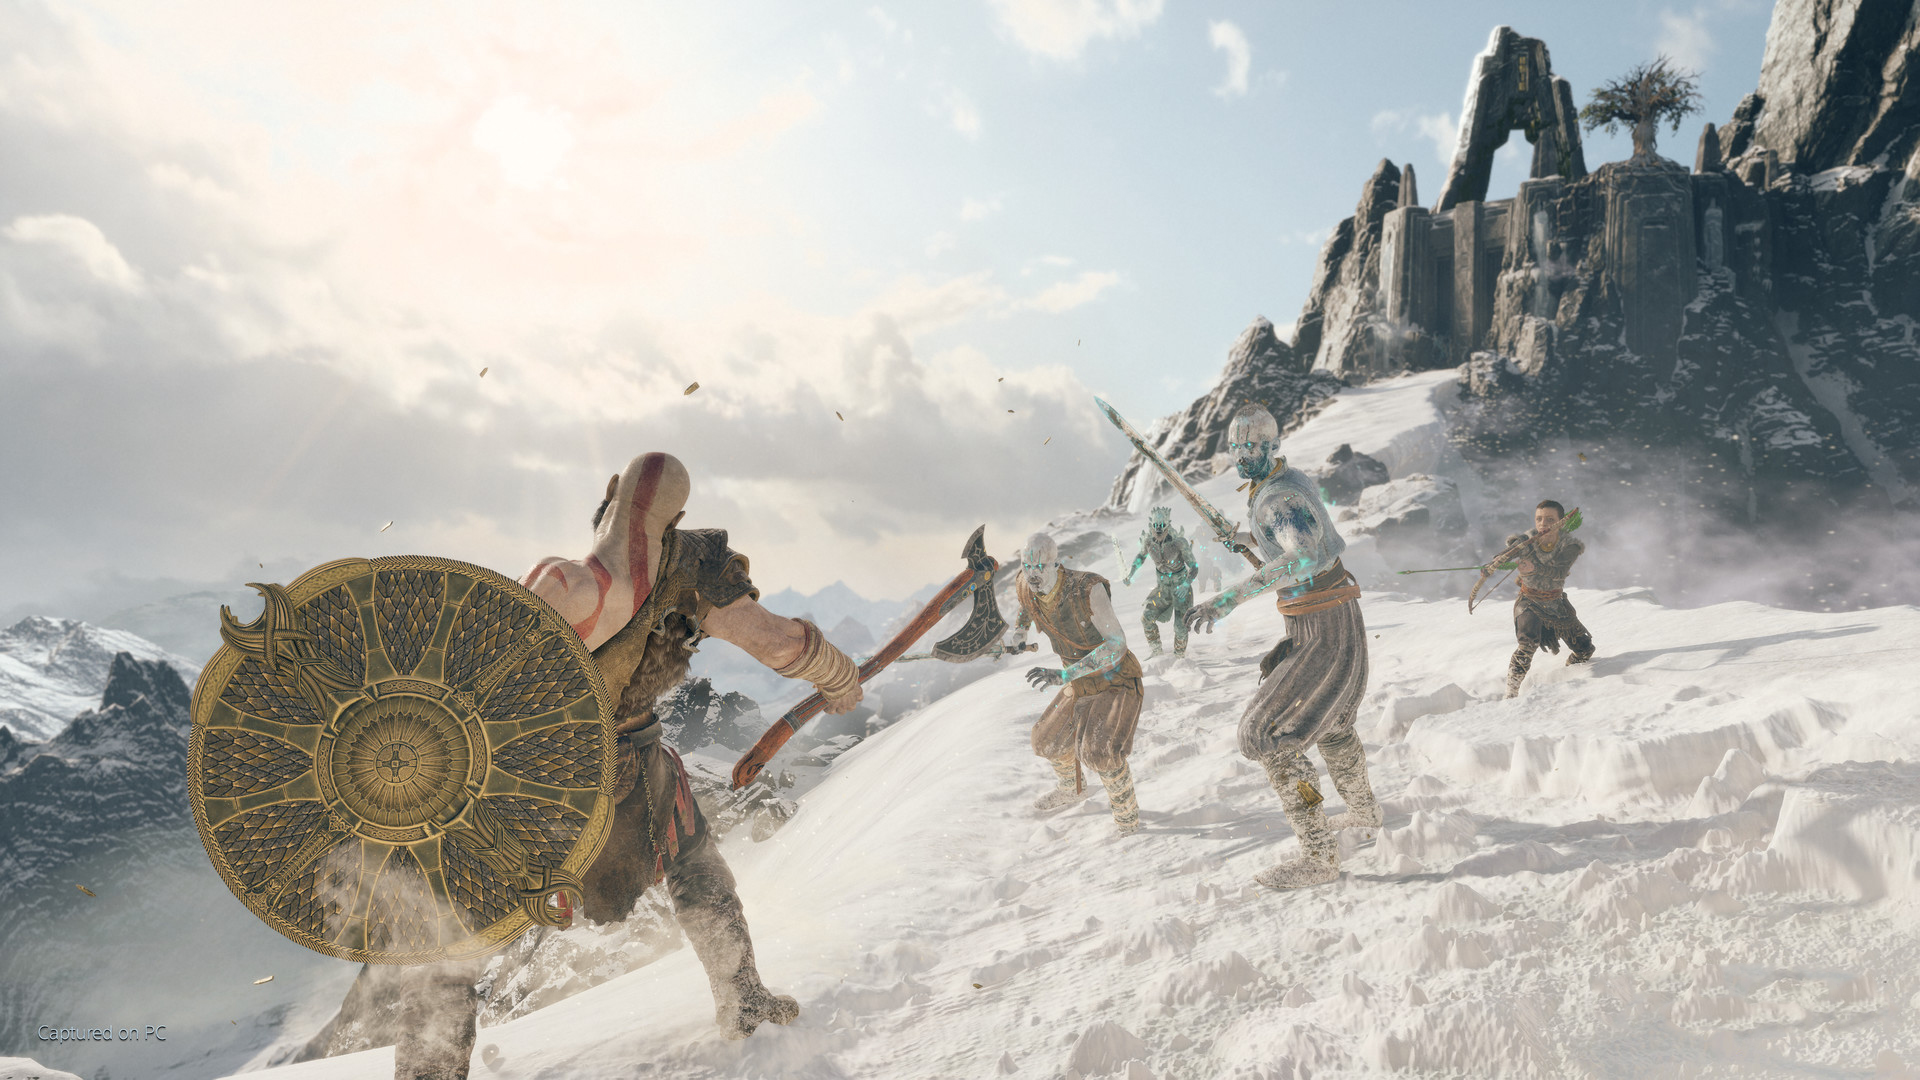 Kratos and Atreus face off against white walkers